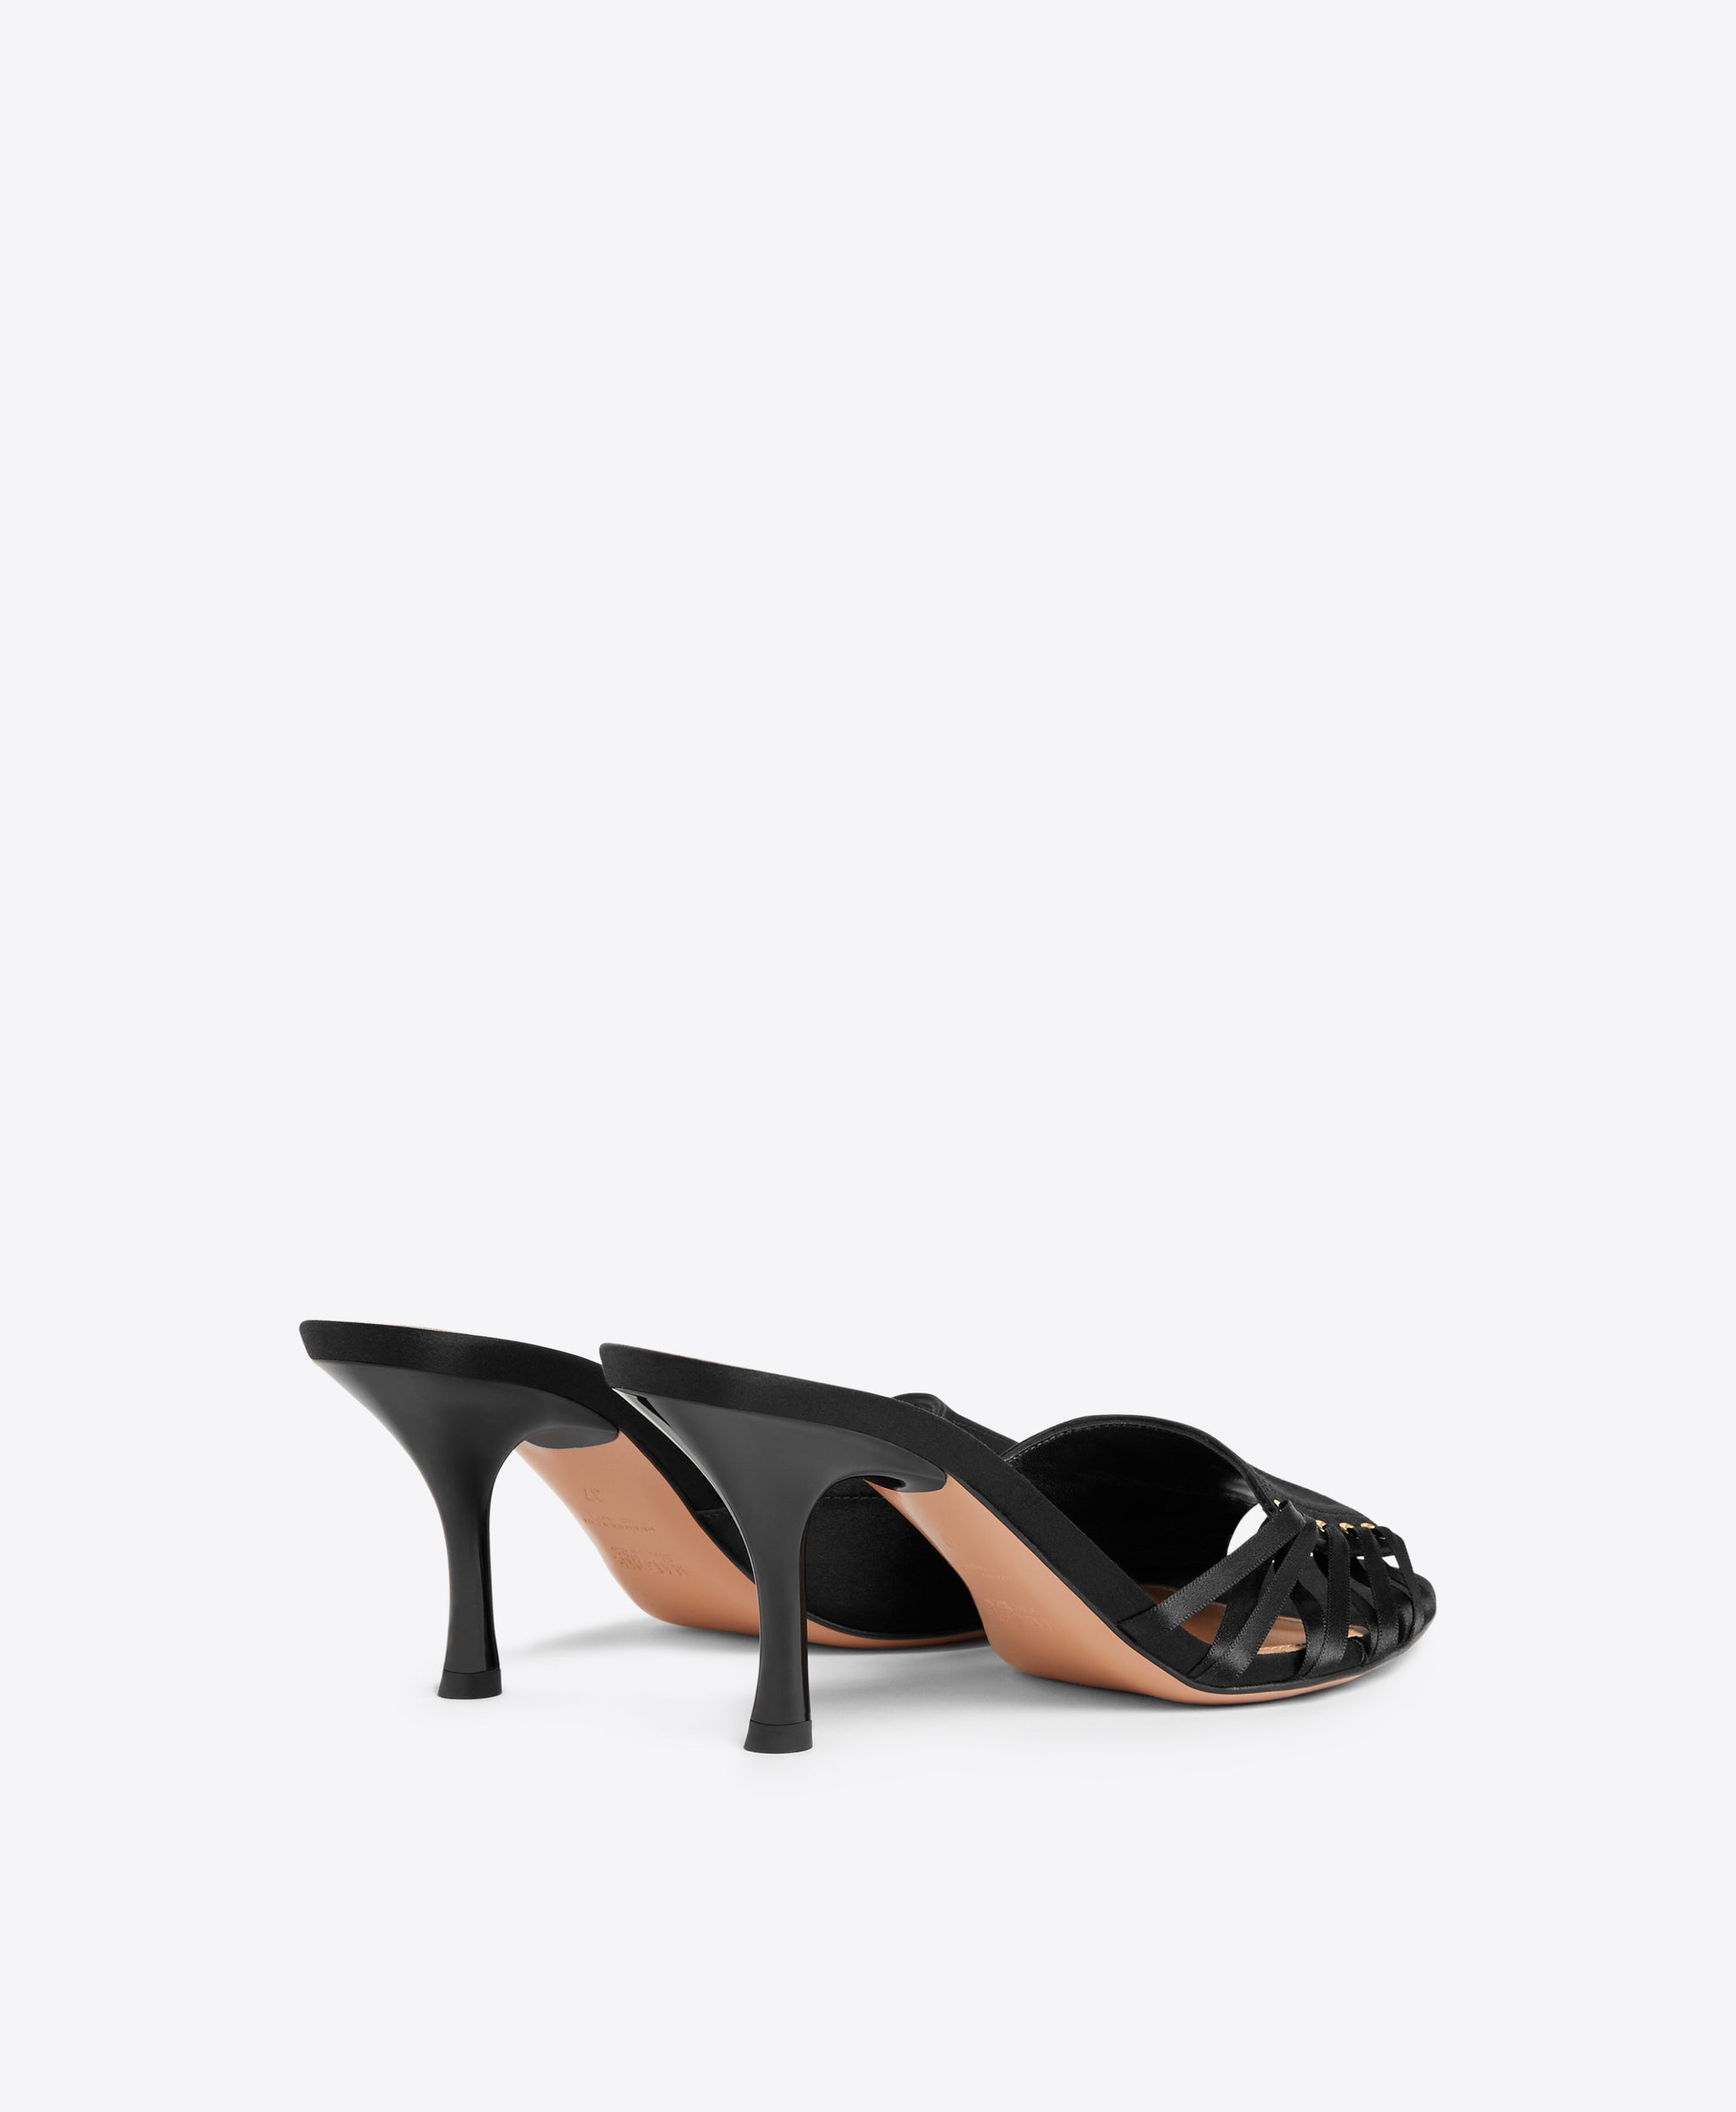 Malone Souliers Bexley 70 Black Satin Heeled Sandals